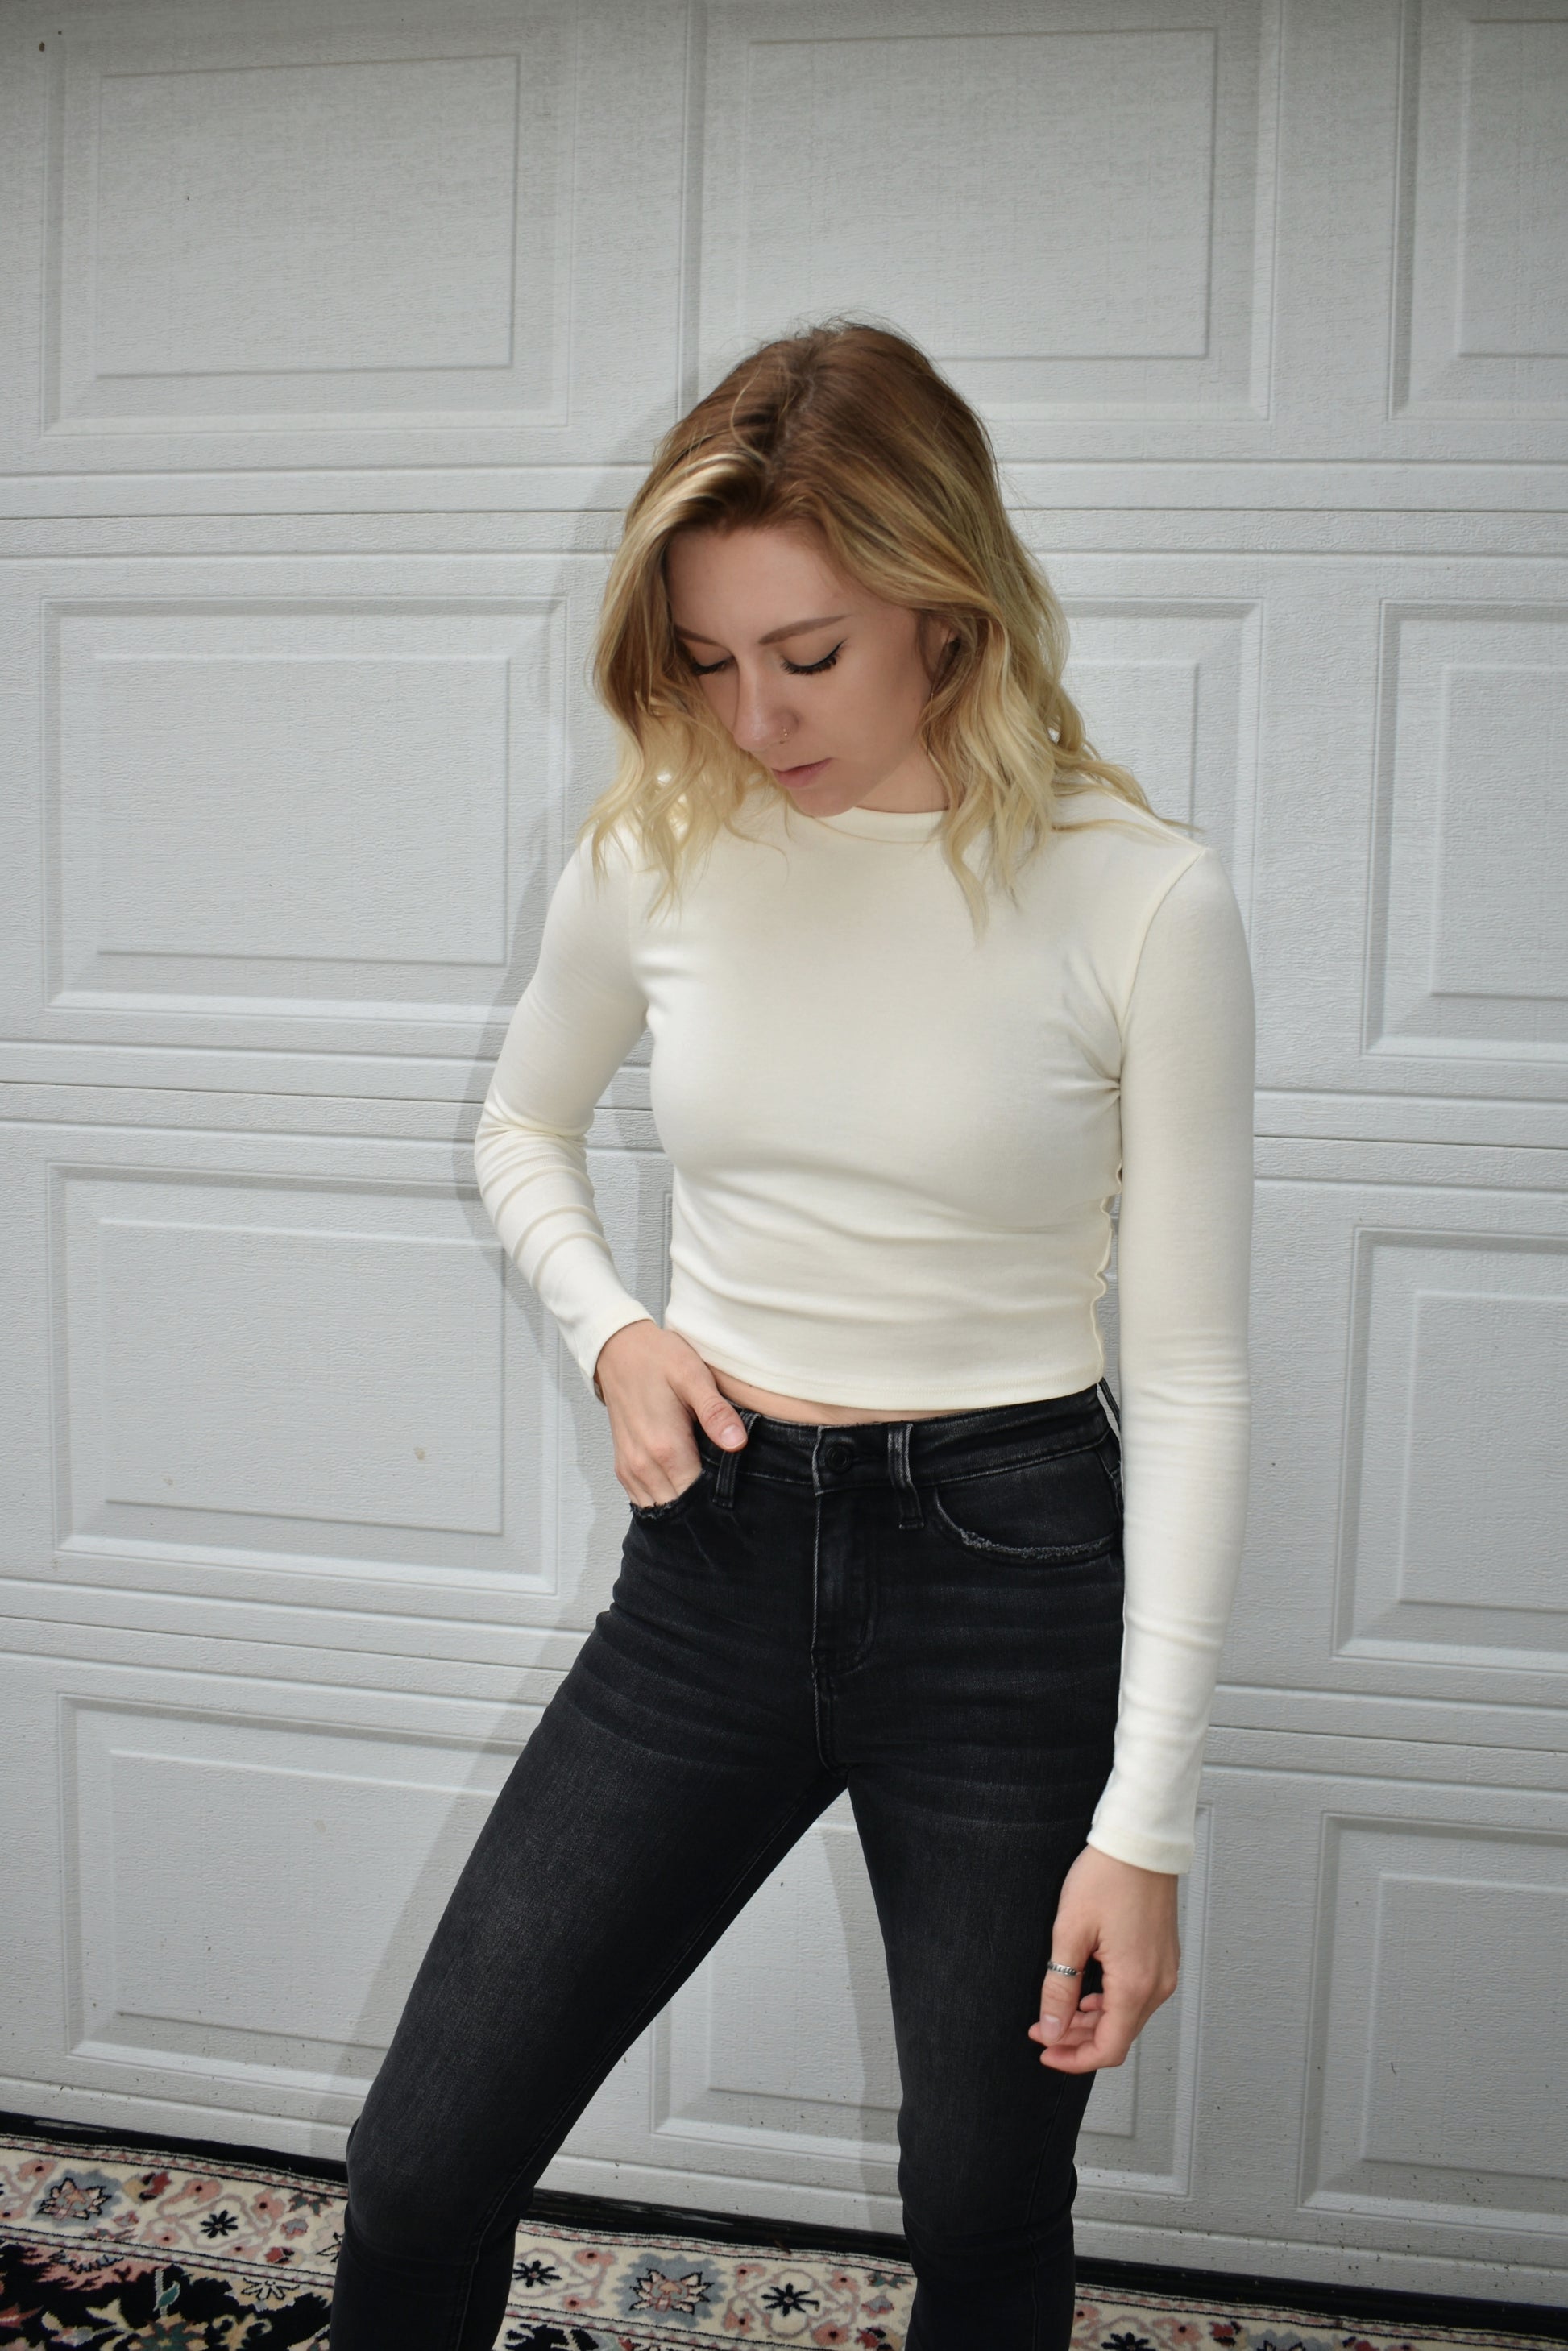 cream long steeve essential fitted cropped top with round neck. Stretchy, comfortable, the brand is Hyfve.